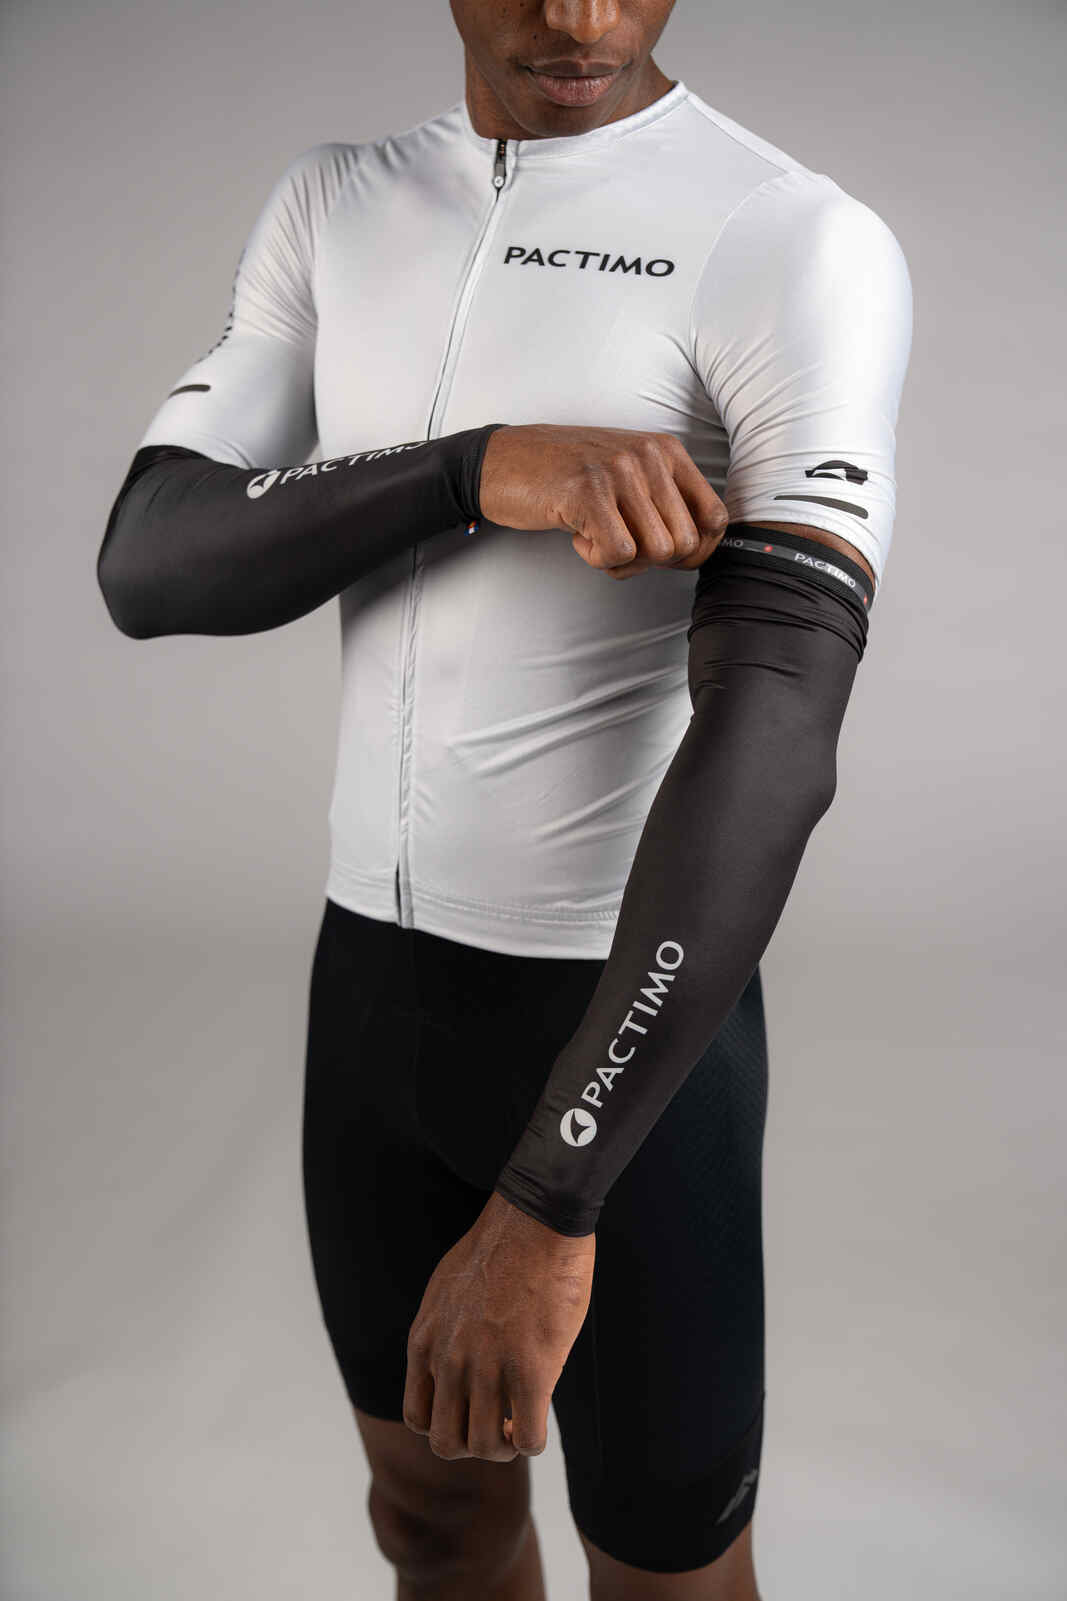 Cyclist putting on cycling sun sleeves in black